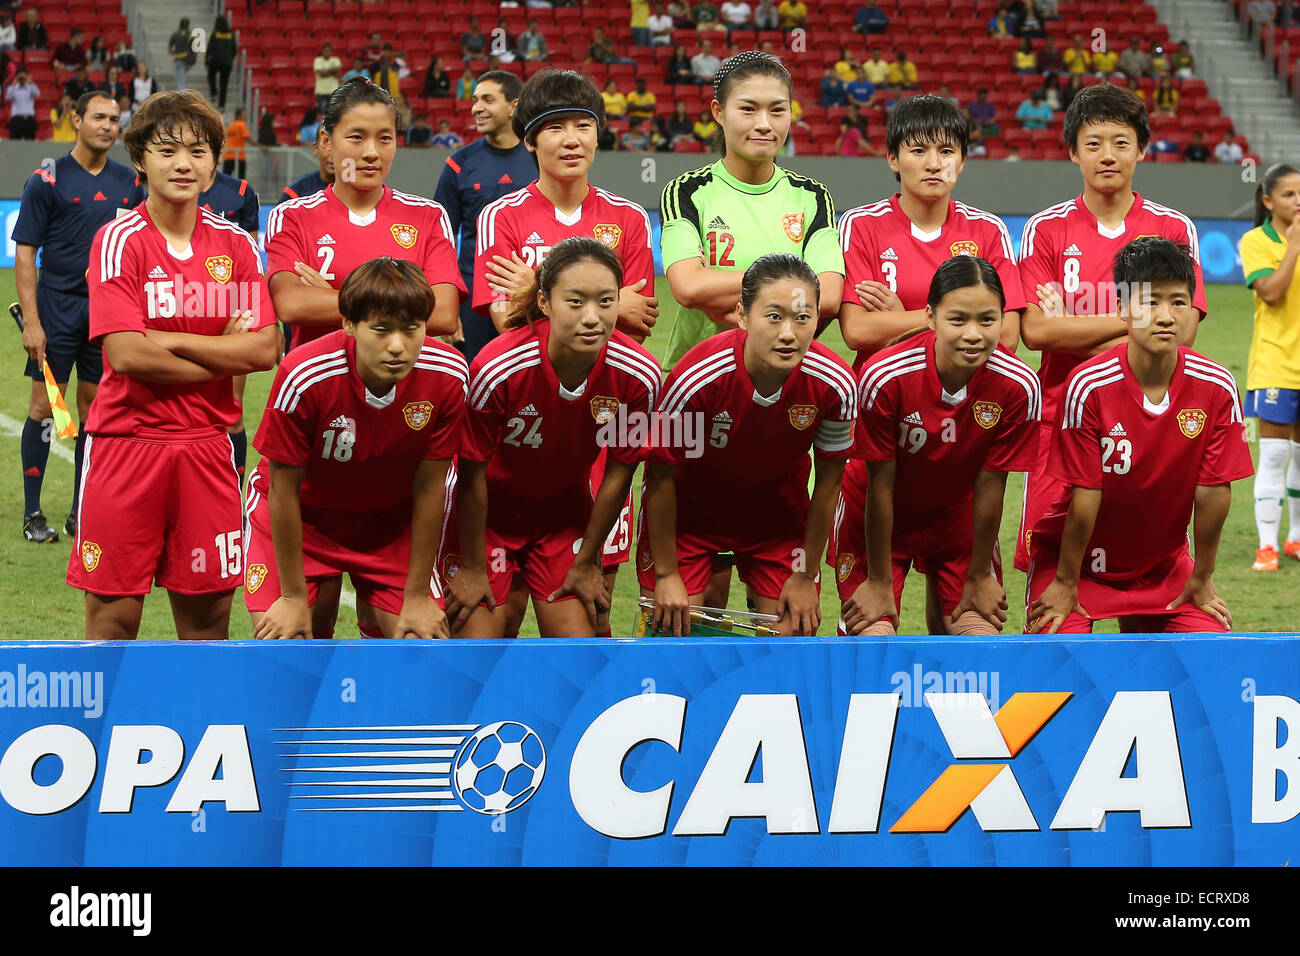 Brasilia, Brazil. 18th Dec, 2014. China's start players pose for a photo prior to a match between China and Brazil of the 2014 International Tournament of Brasilia in Brasilia, capital of Brazil, Dec. 18, 2014. Brazil won 4-1. © Xu Zijian/Xinhua/Alamy Live News Stock Photo